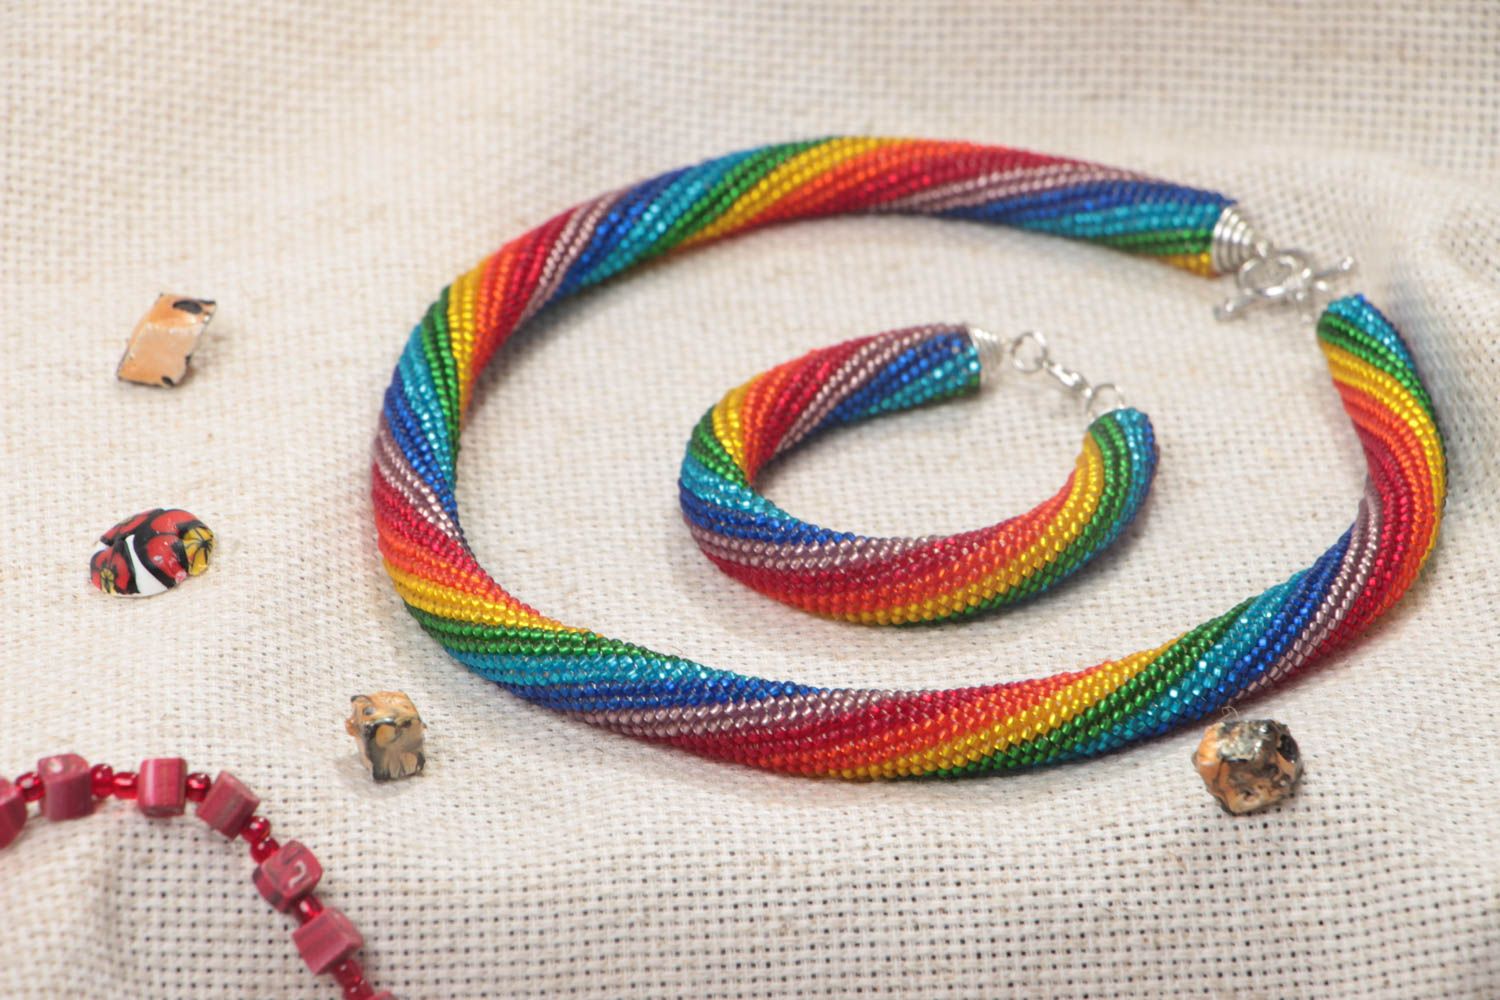 Handmade beaded cord jewelry set of rainbow coloring necklace and wrist bracelet photo 1